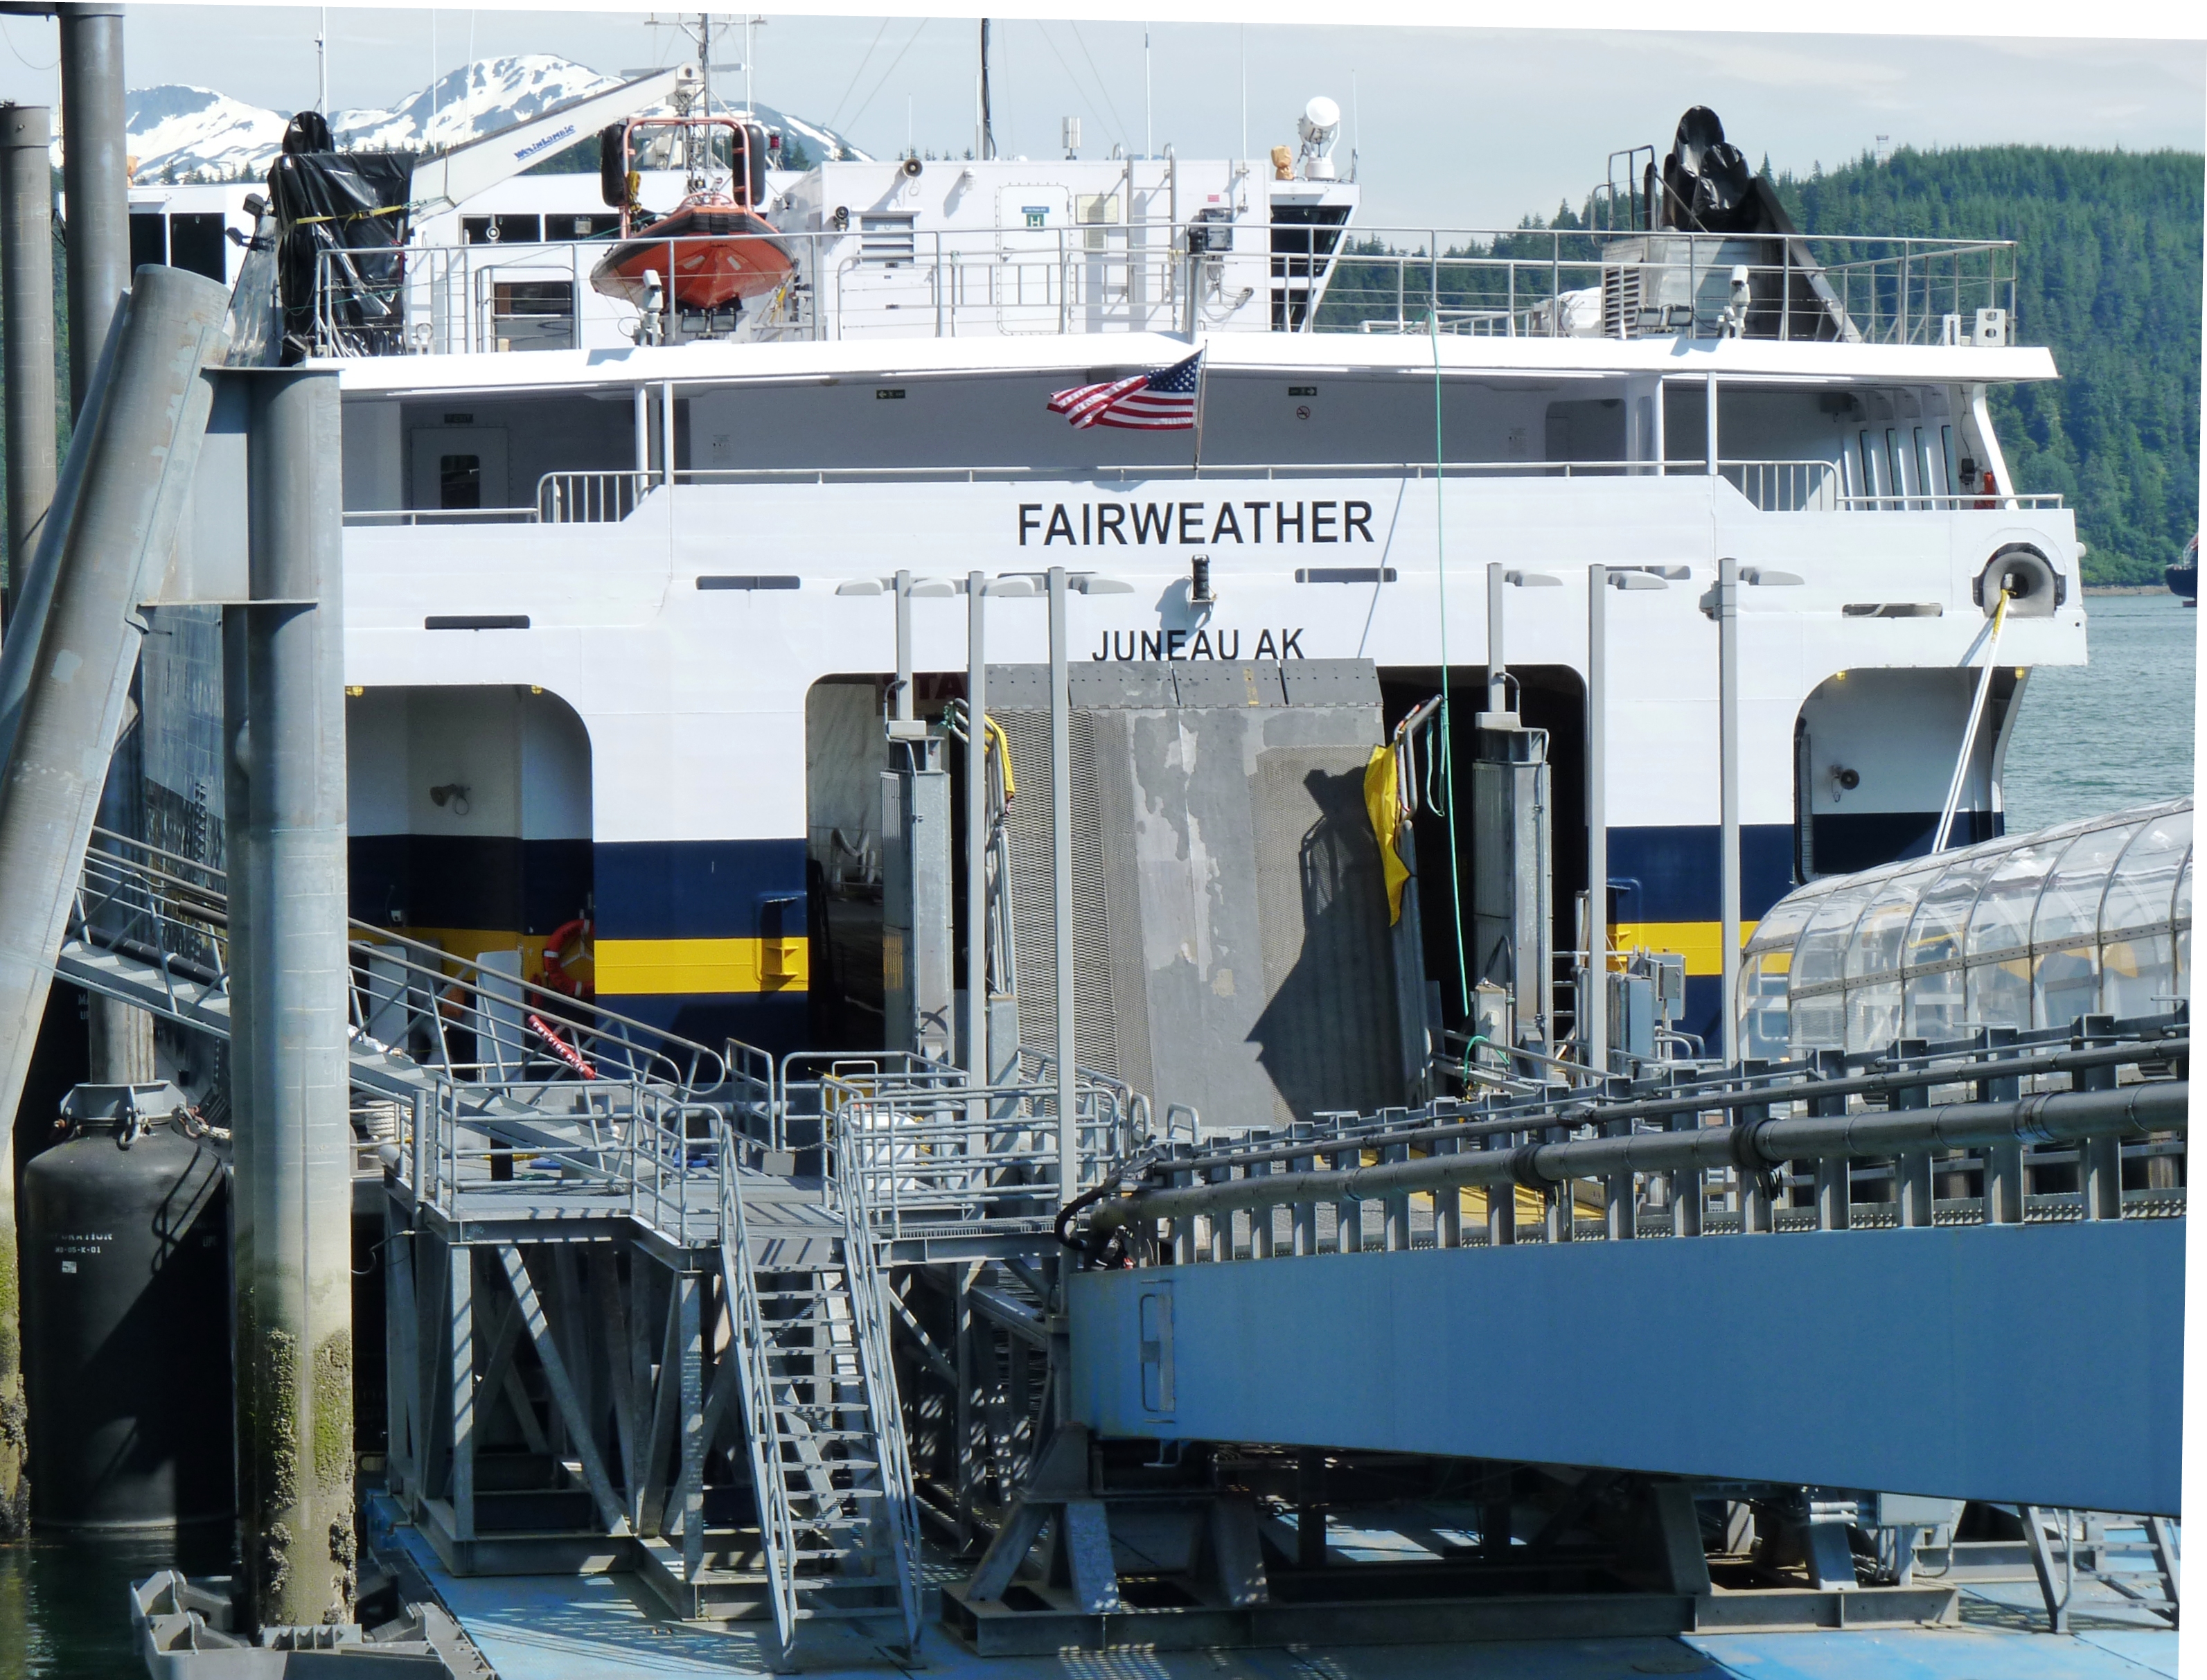 The fast ferry Fairweather docks at Juneau’s Auke Bay Ferry Terminal in 2013. It’s one of several ships with an uncertain future as the marine highway system’s budget shrinks. (Photo by Ed Schoenfeld, CoastAlaska News - Juneau)